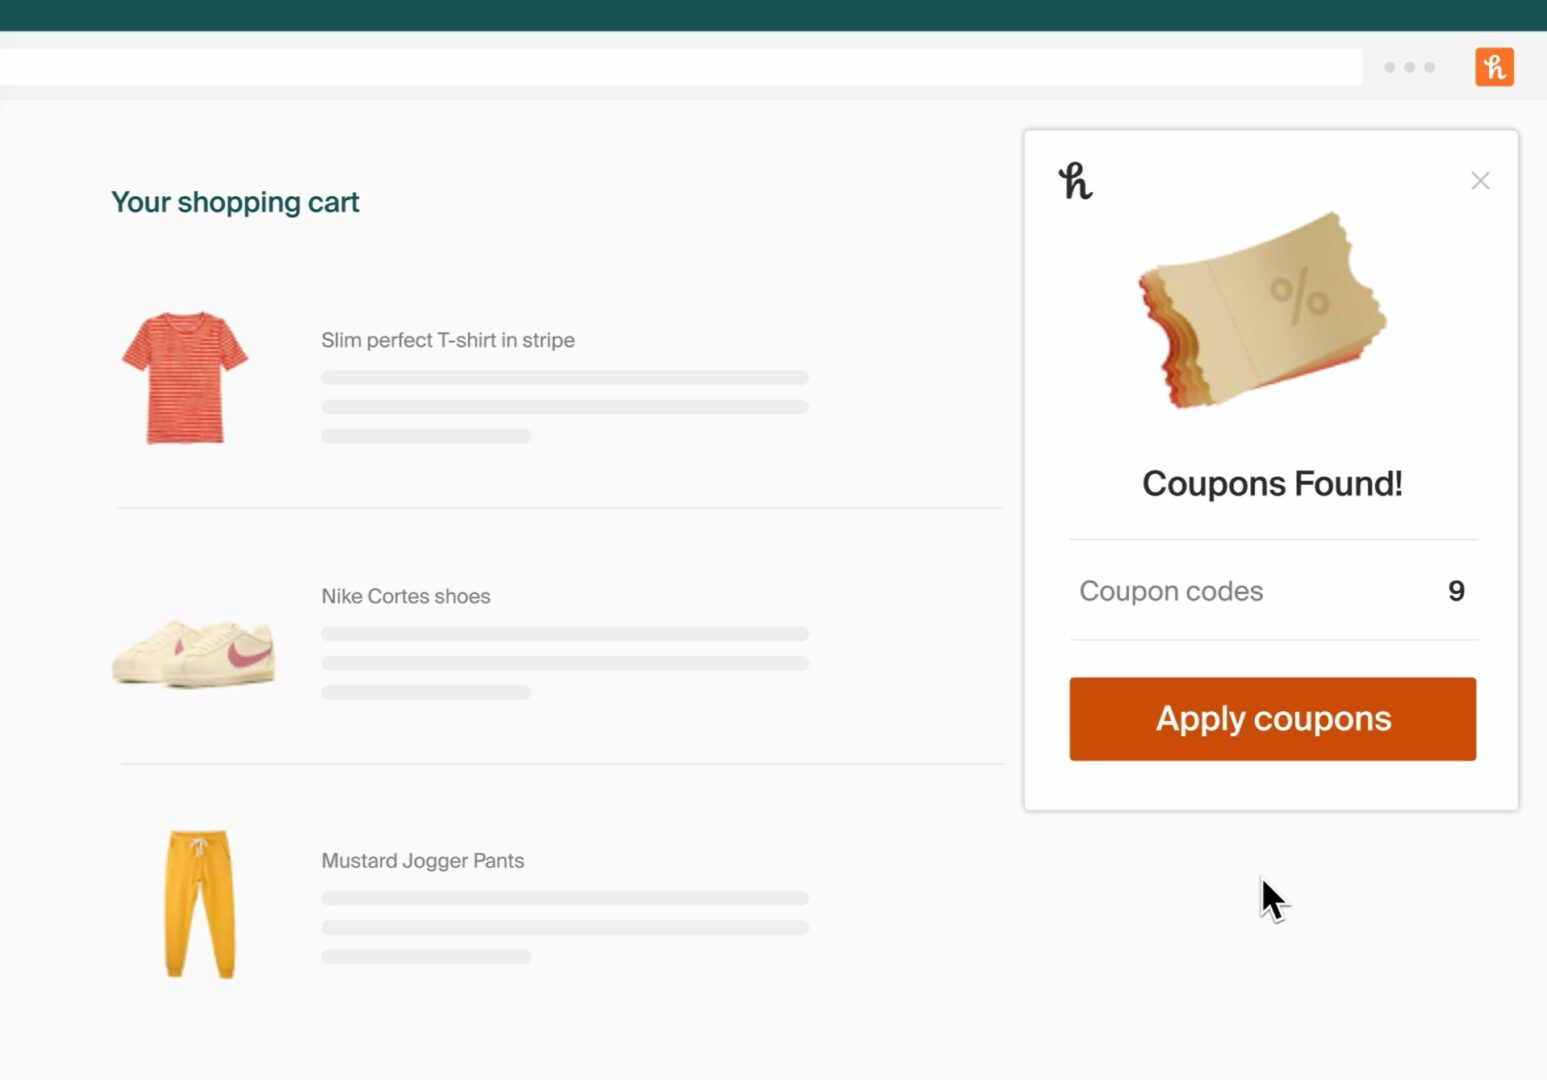 A Google Chrome extension that automatically finds coupon codes when shopping online